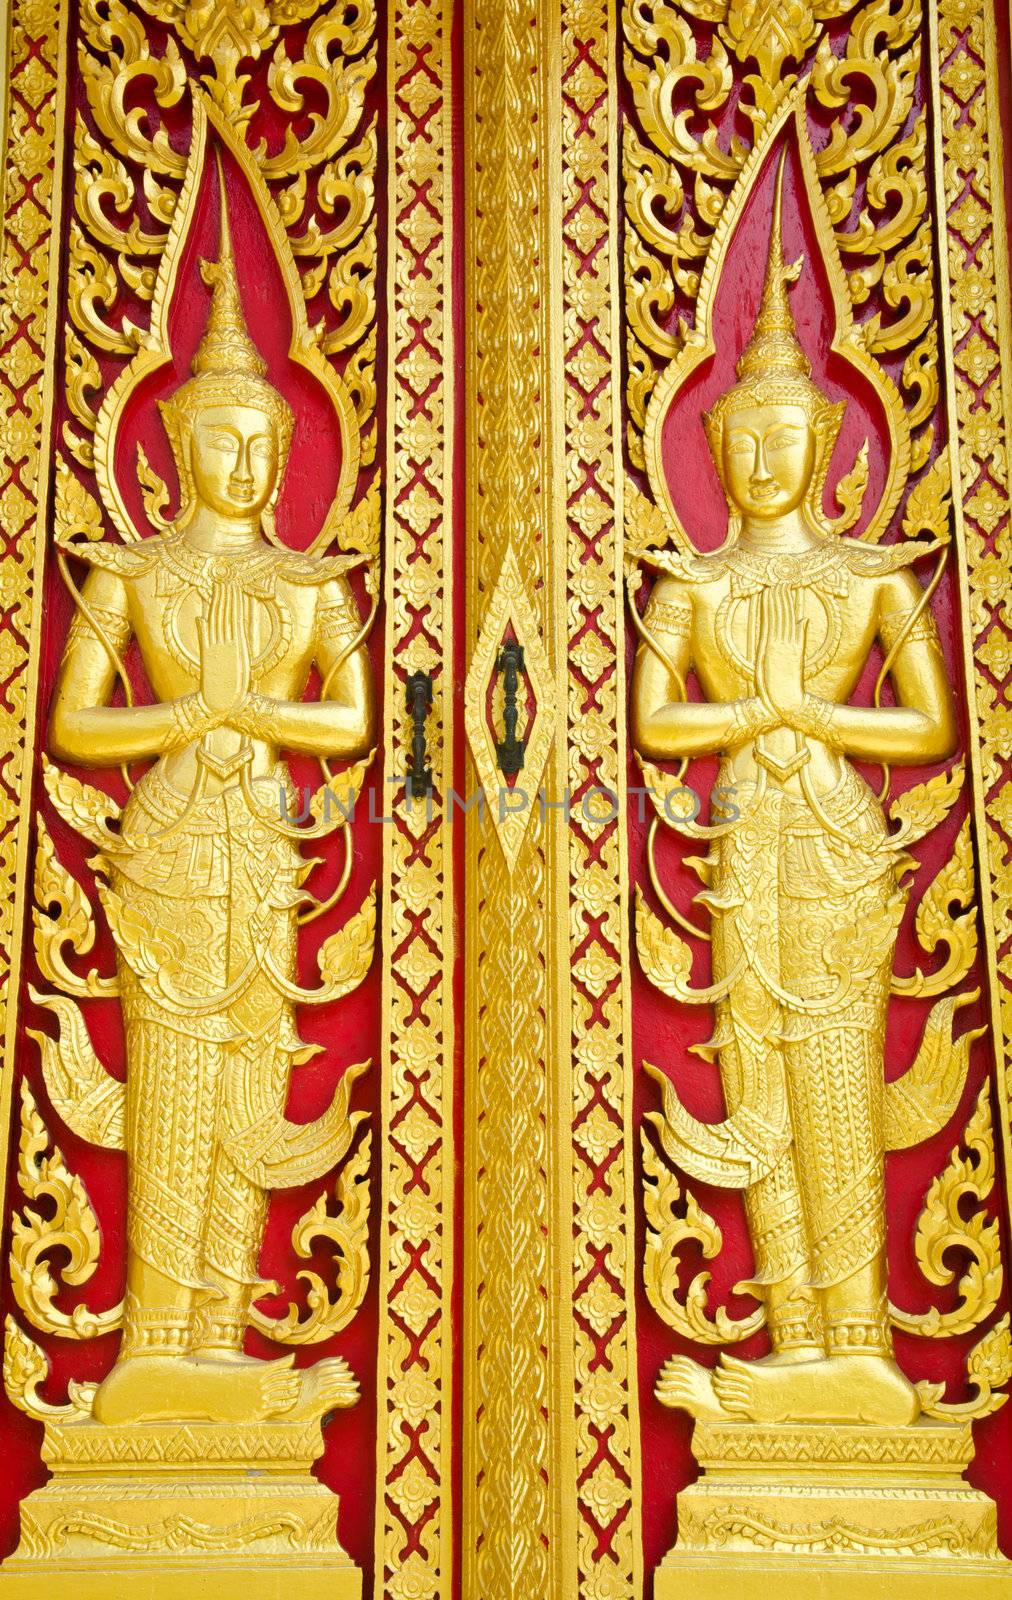 Images carved wood. Buddhist Churches of the door.